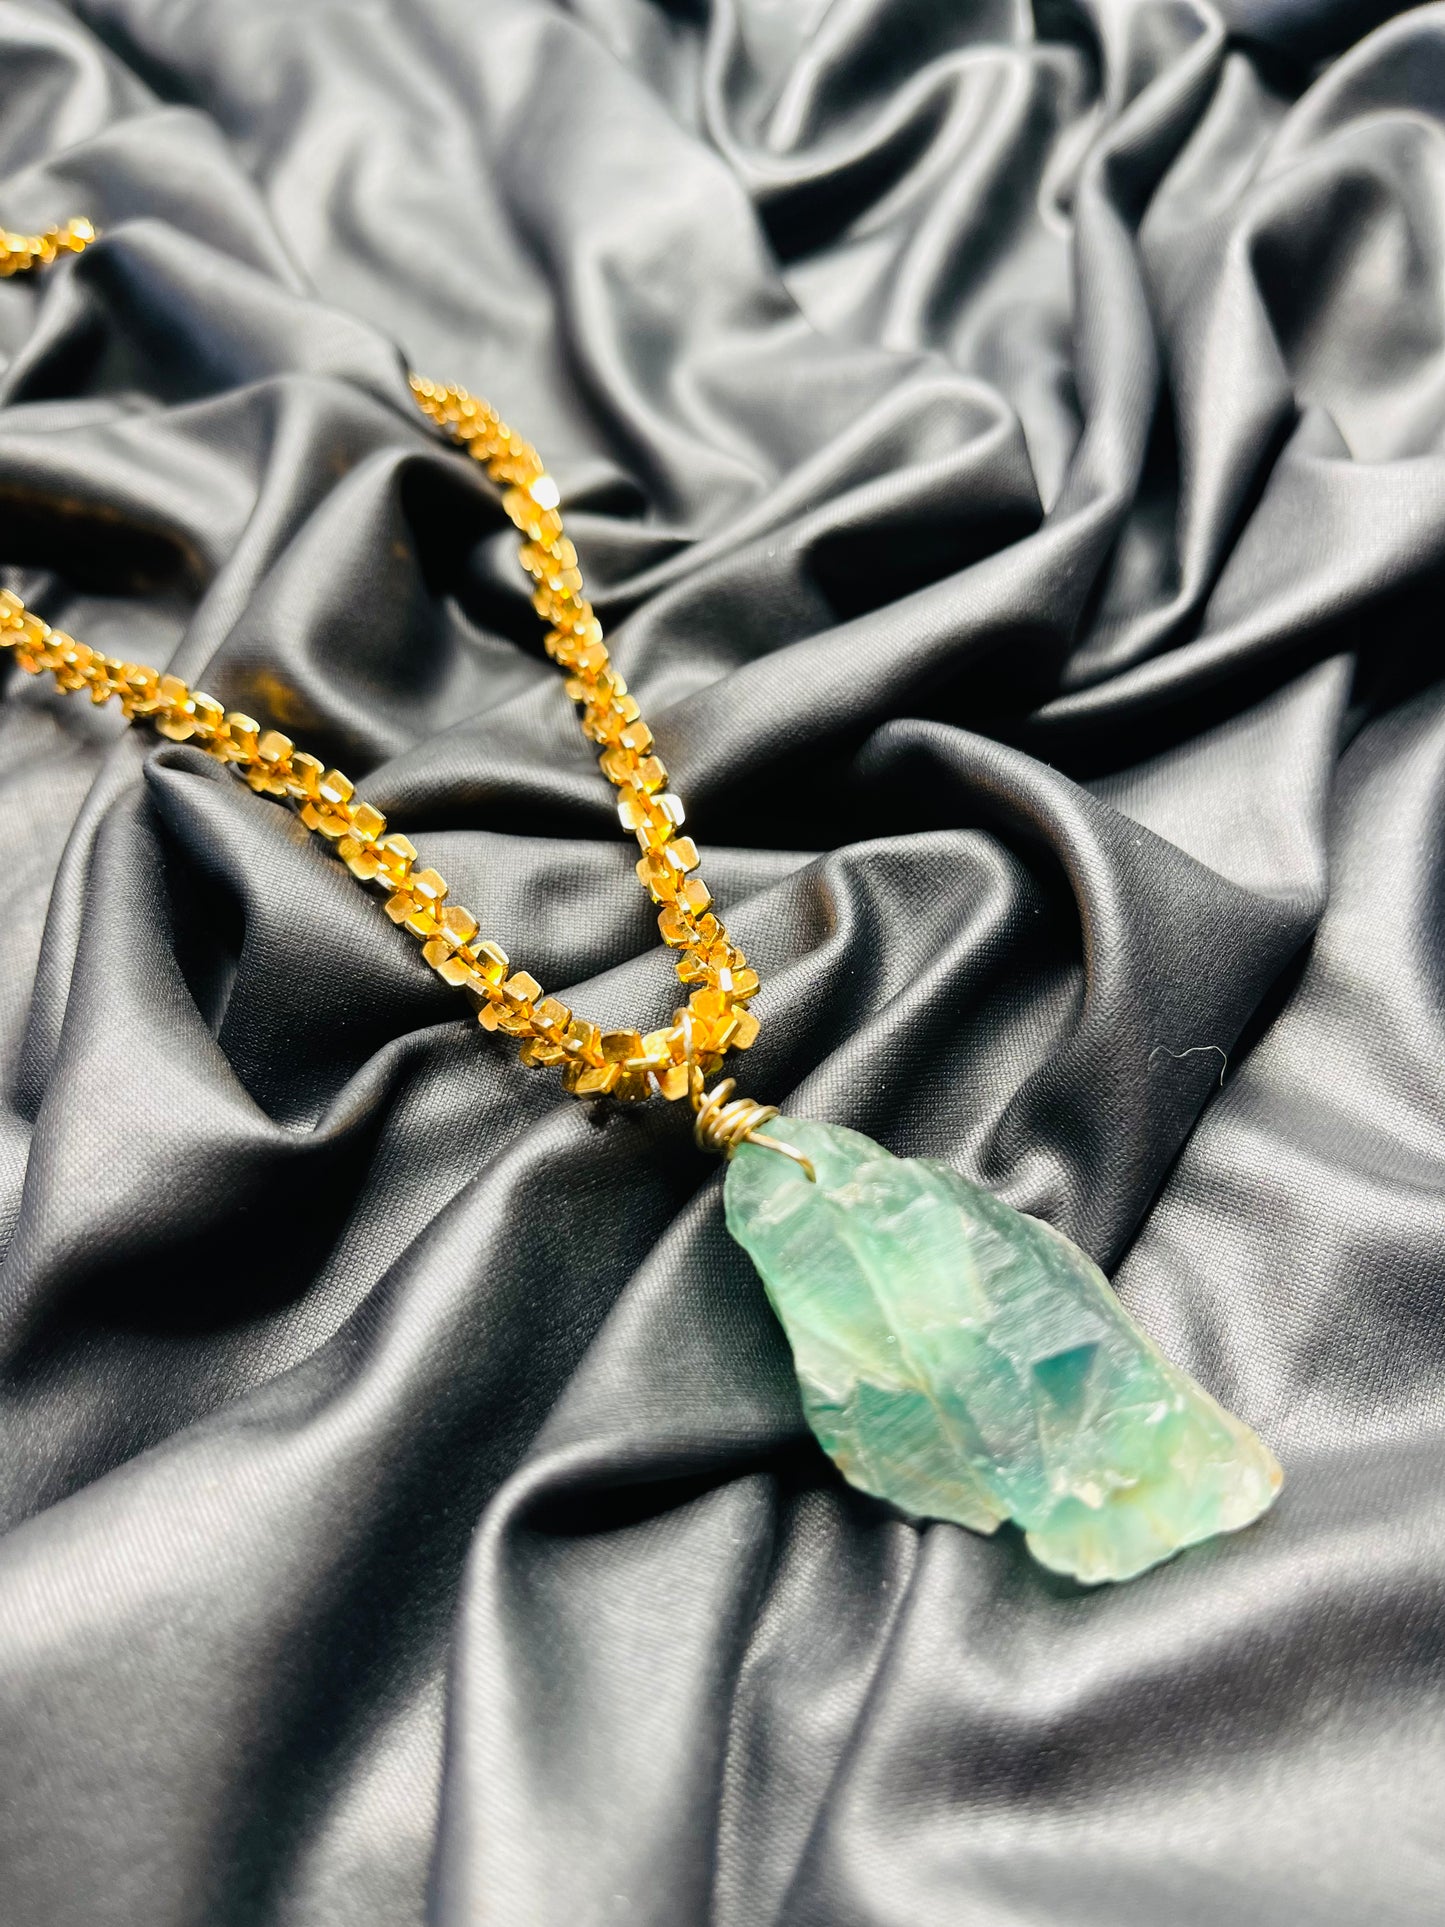 Chunky Raw Rainbow Fluorite Crystal Nugget - Vintage Gold Soul Chain Necklace